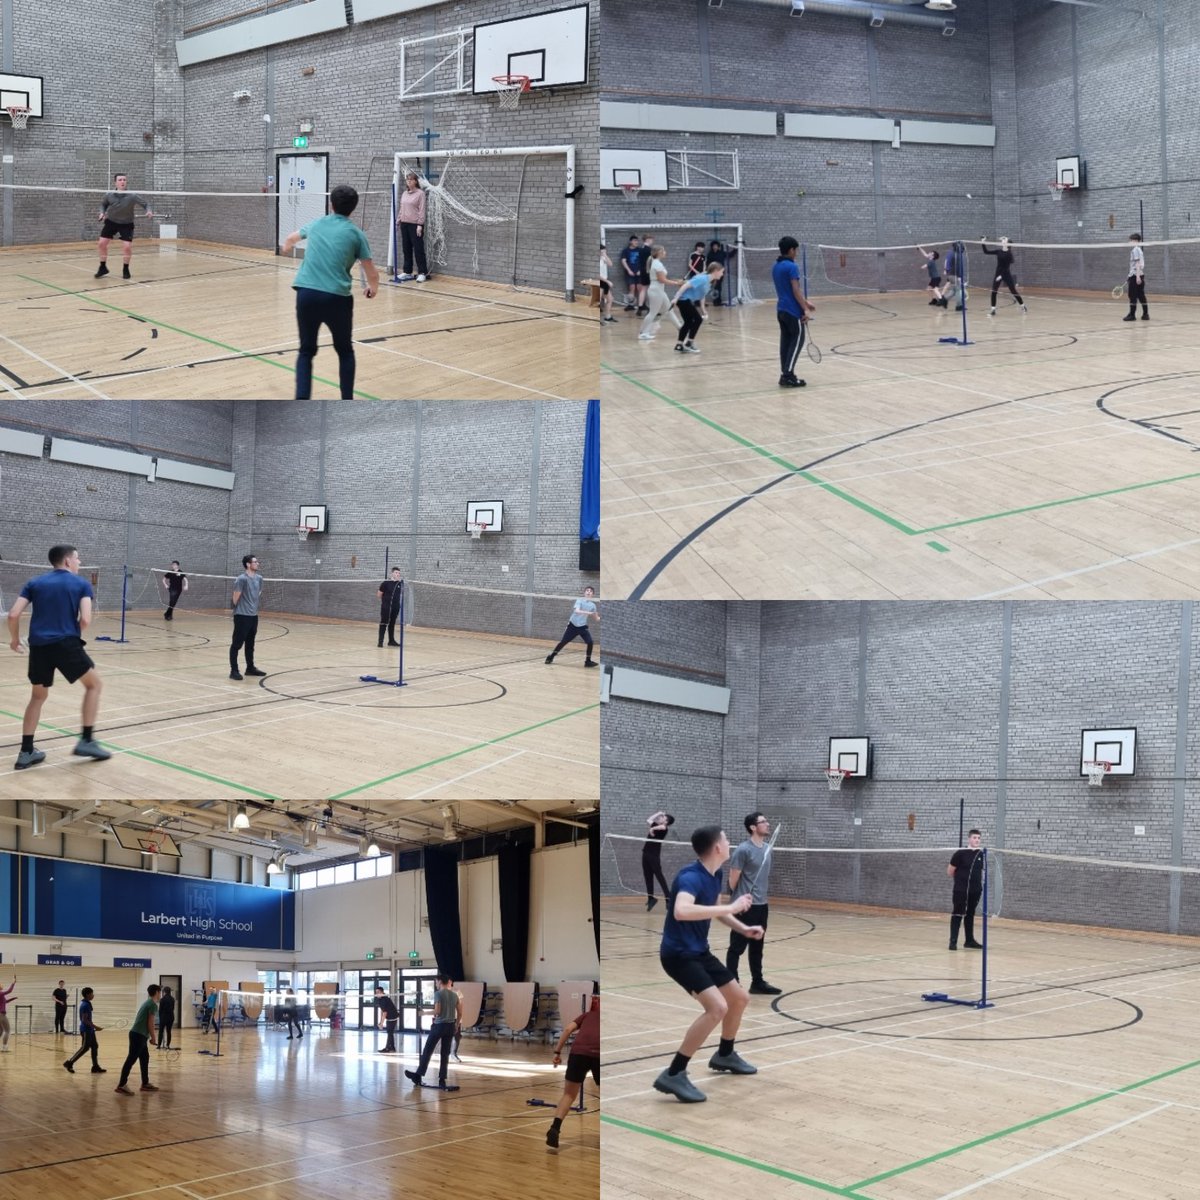 🏸Badminton Competition 🏸 Great evening of Badminton with high level of skill on show with over 40 pupils and 15 staff taking part 👏🏻 All finals were very close games. 🏆Over all winners were: BGE:Gregor SENIOR:Wallace STAFF:@MrPaterson1 Thank you to everyone took part👏🏻